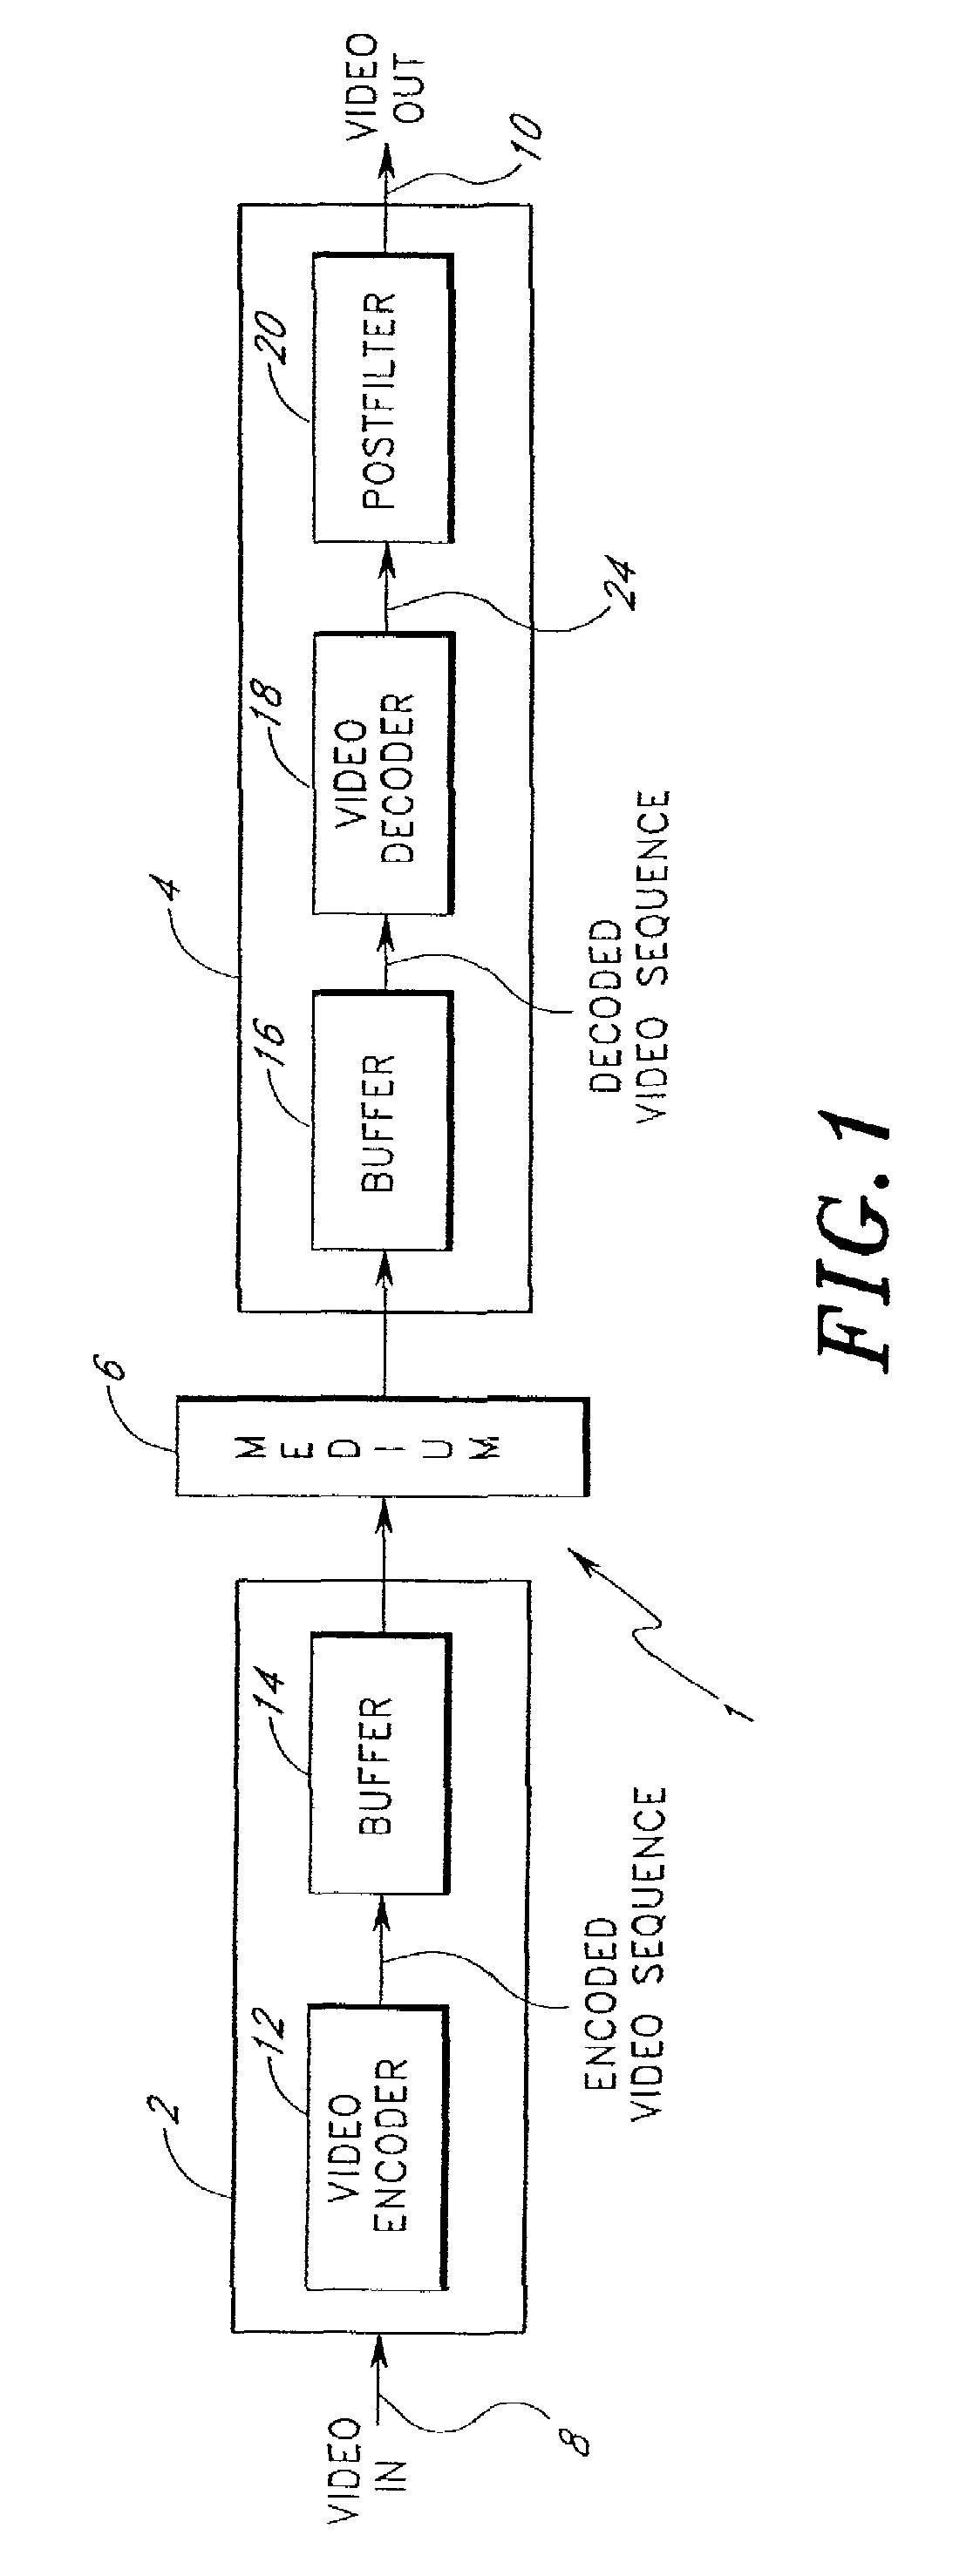 Video compression and decompression system with postfilter to filter coding artifacts